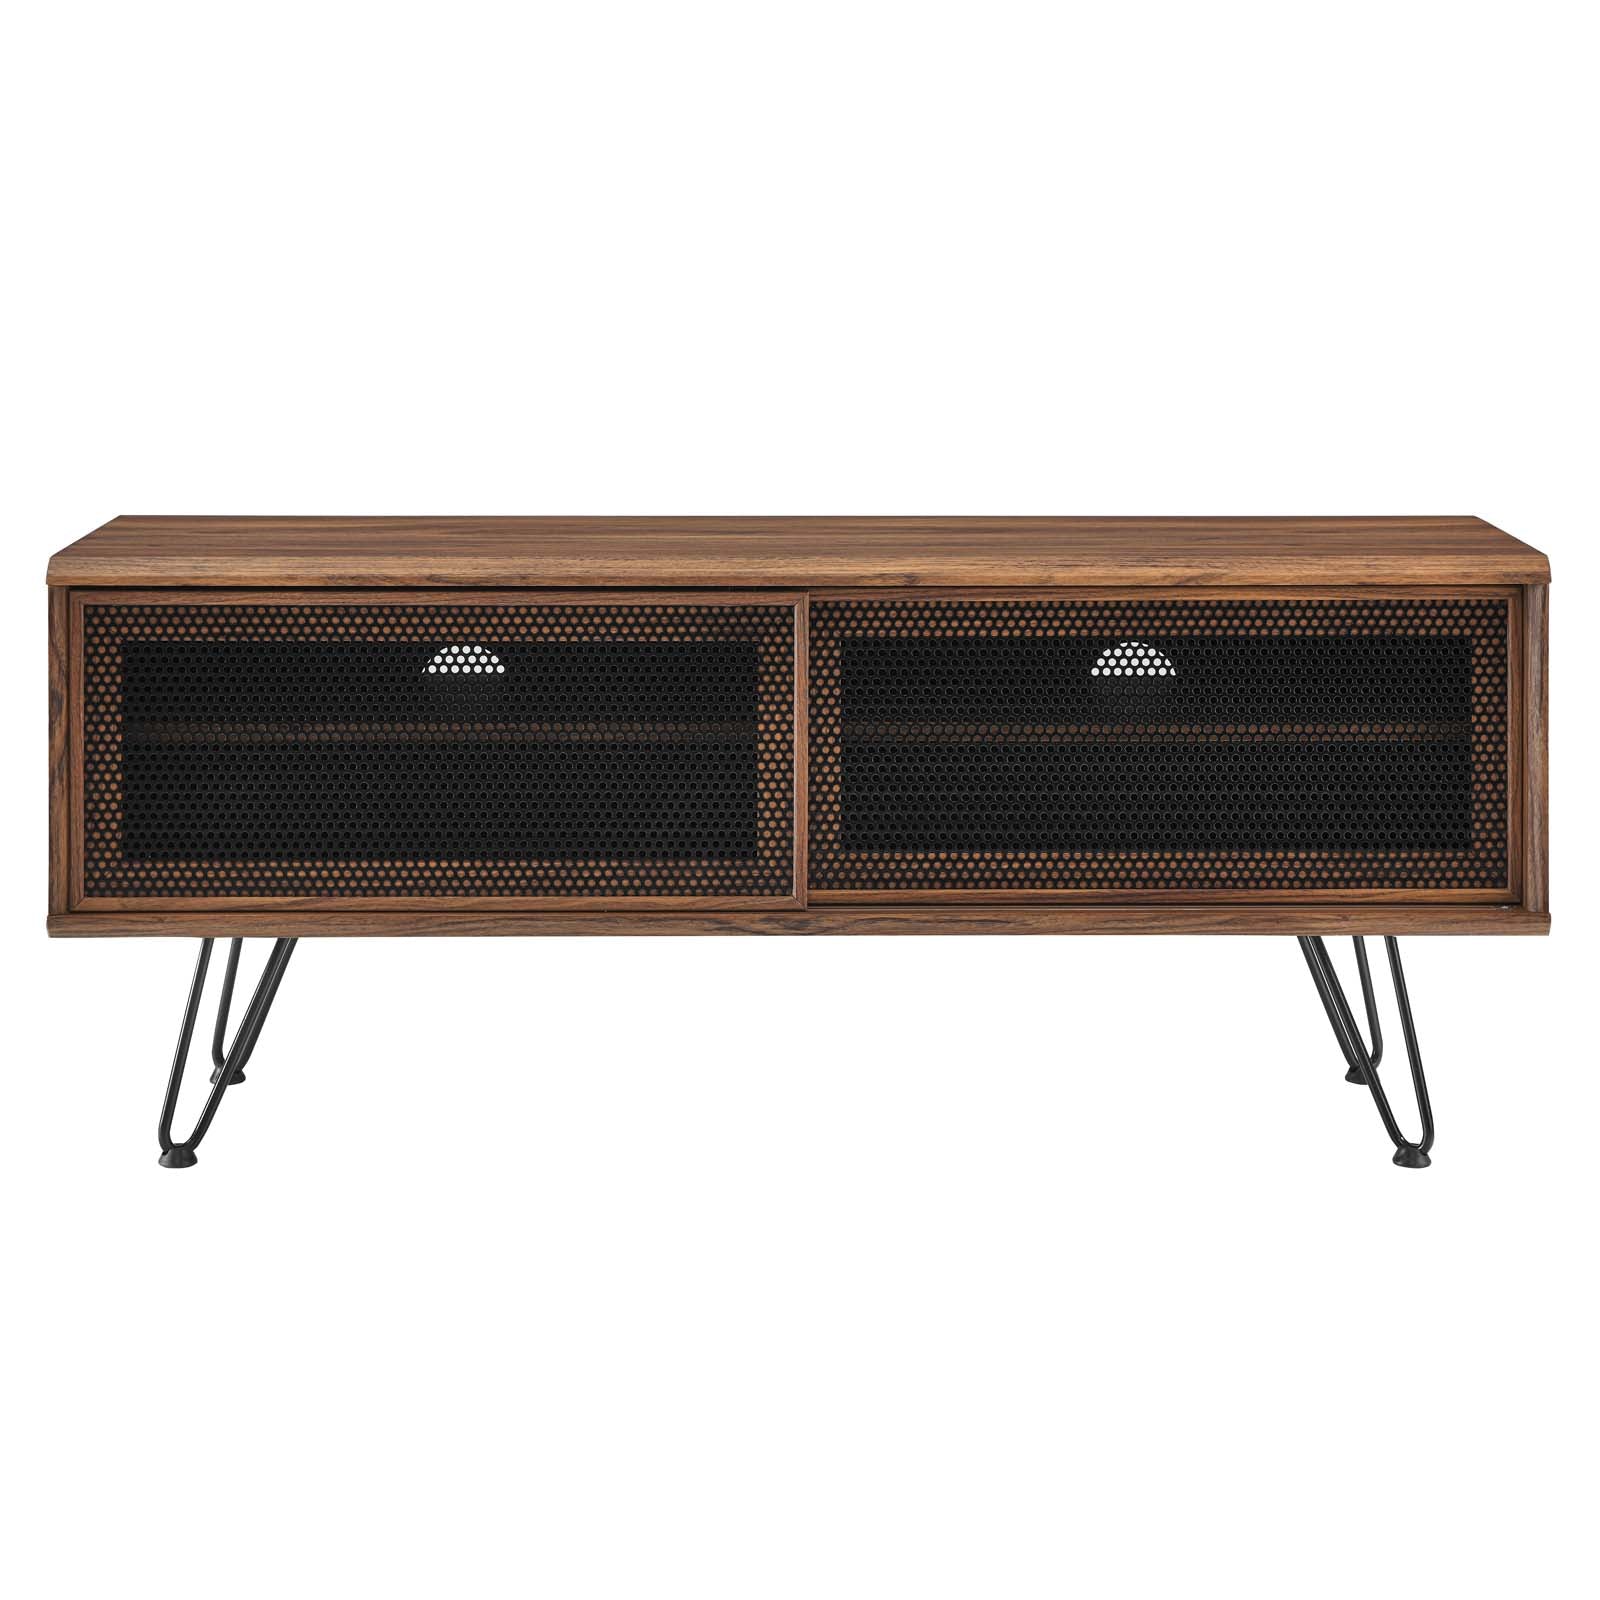 Nomad 47" TV Stand - East Shore Modern Home Furnishings